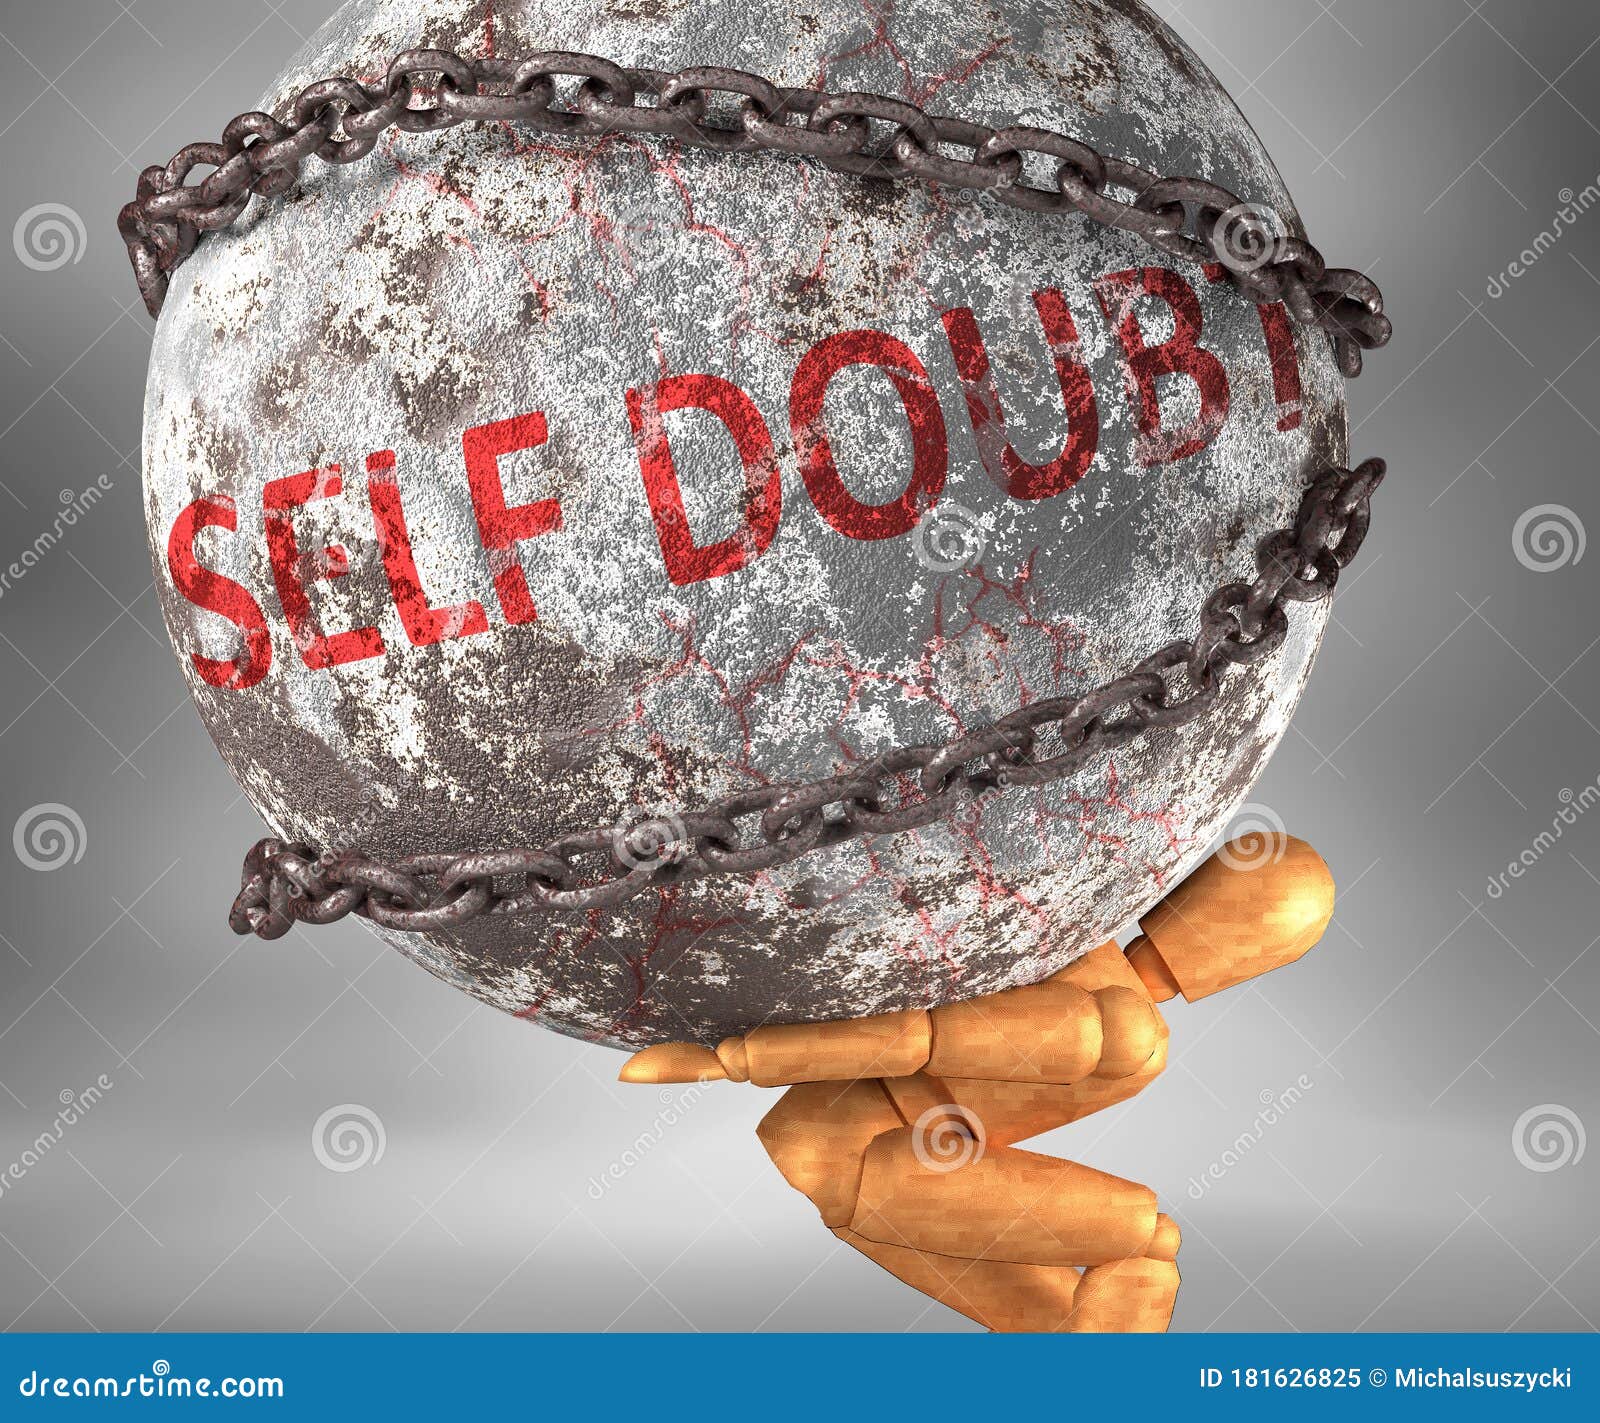 self doubt and hardship in life - pictured by word self doubt as a heavy weight on shoulders to ize self doubt as a burden,